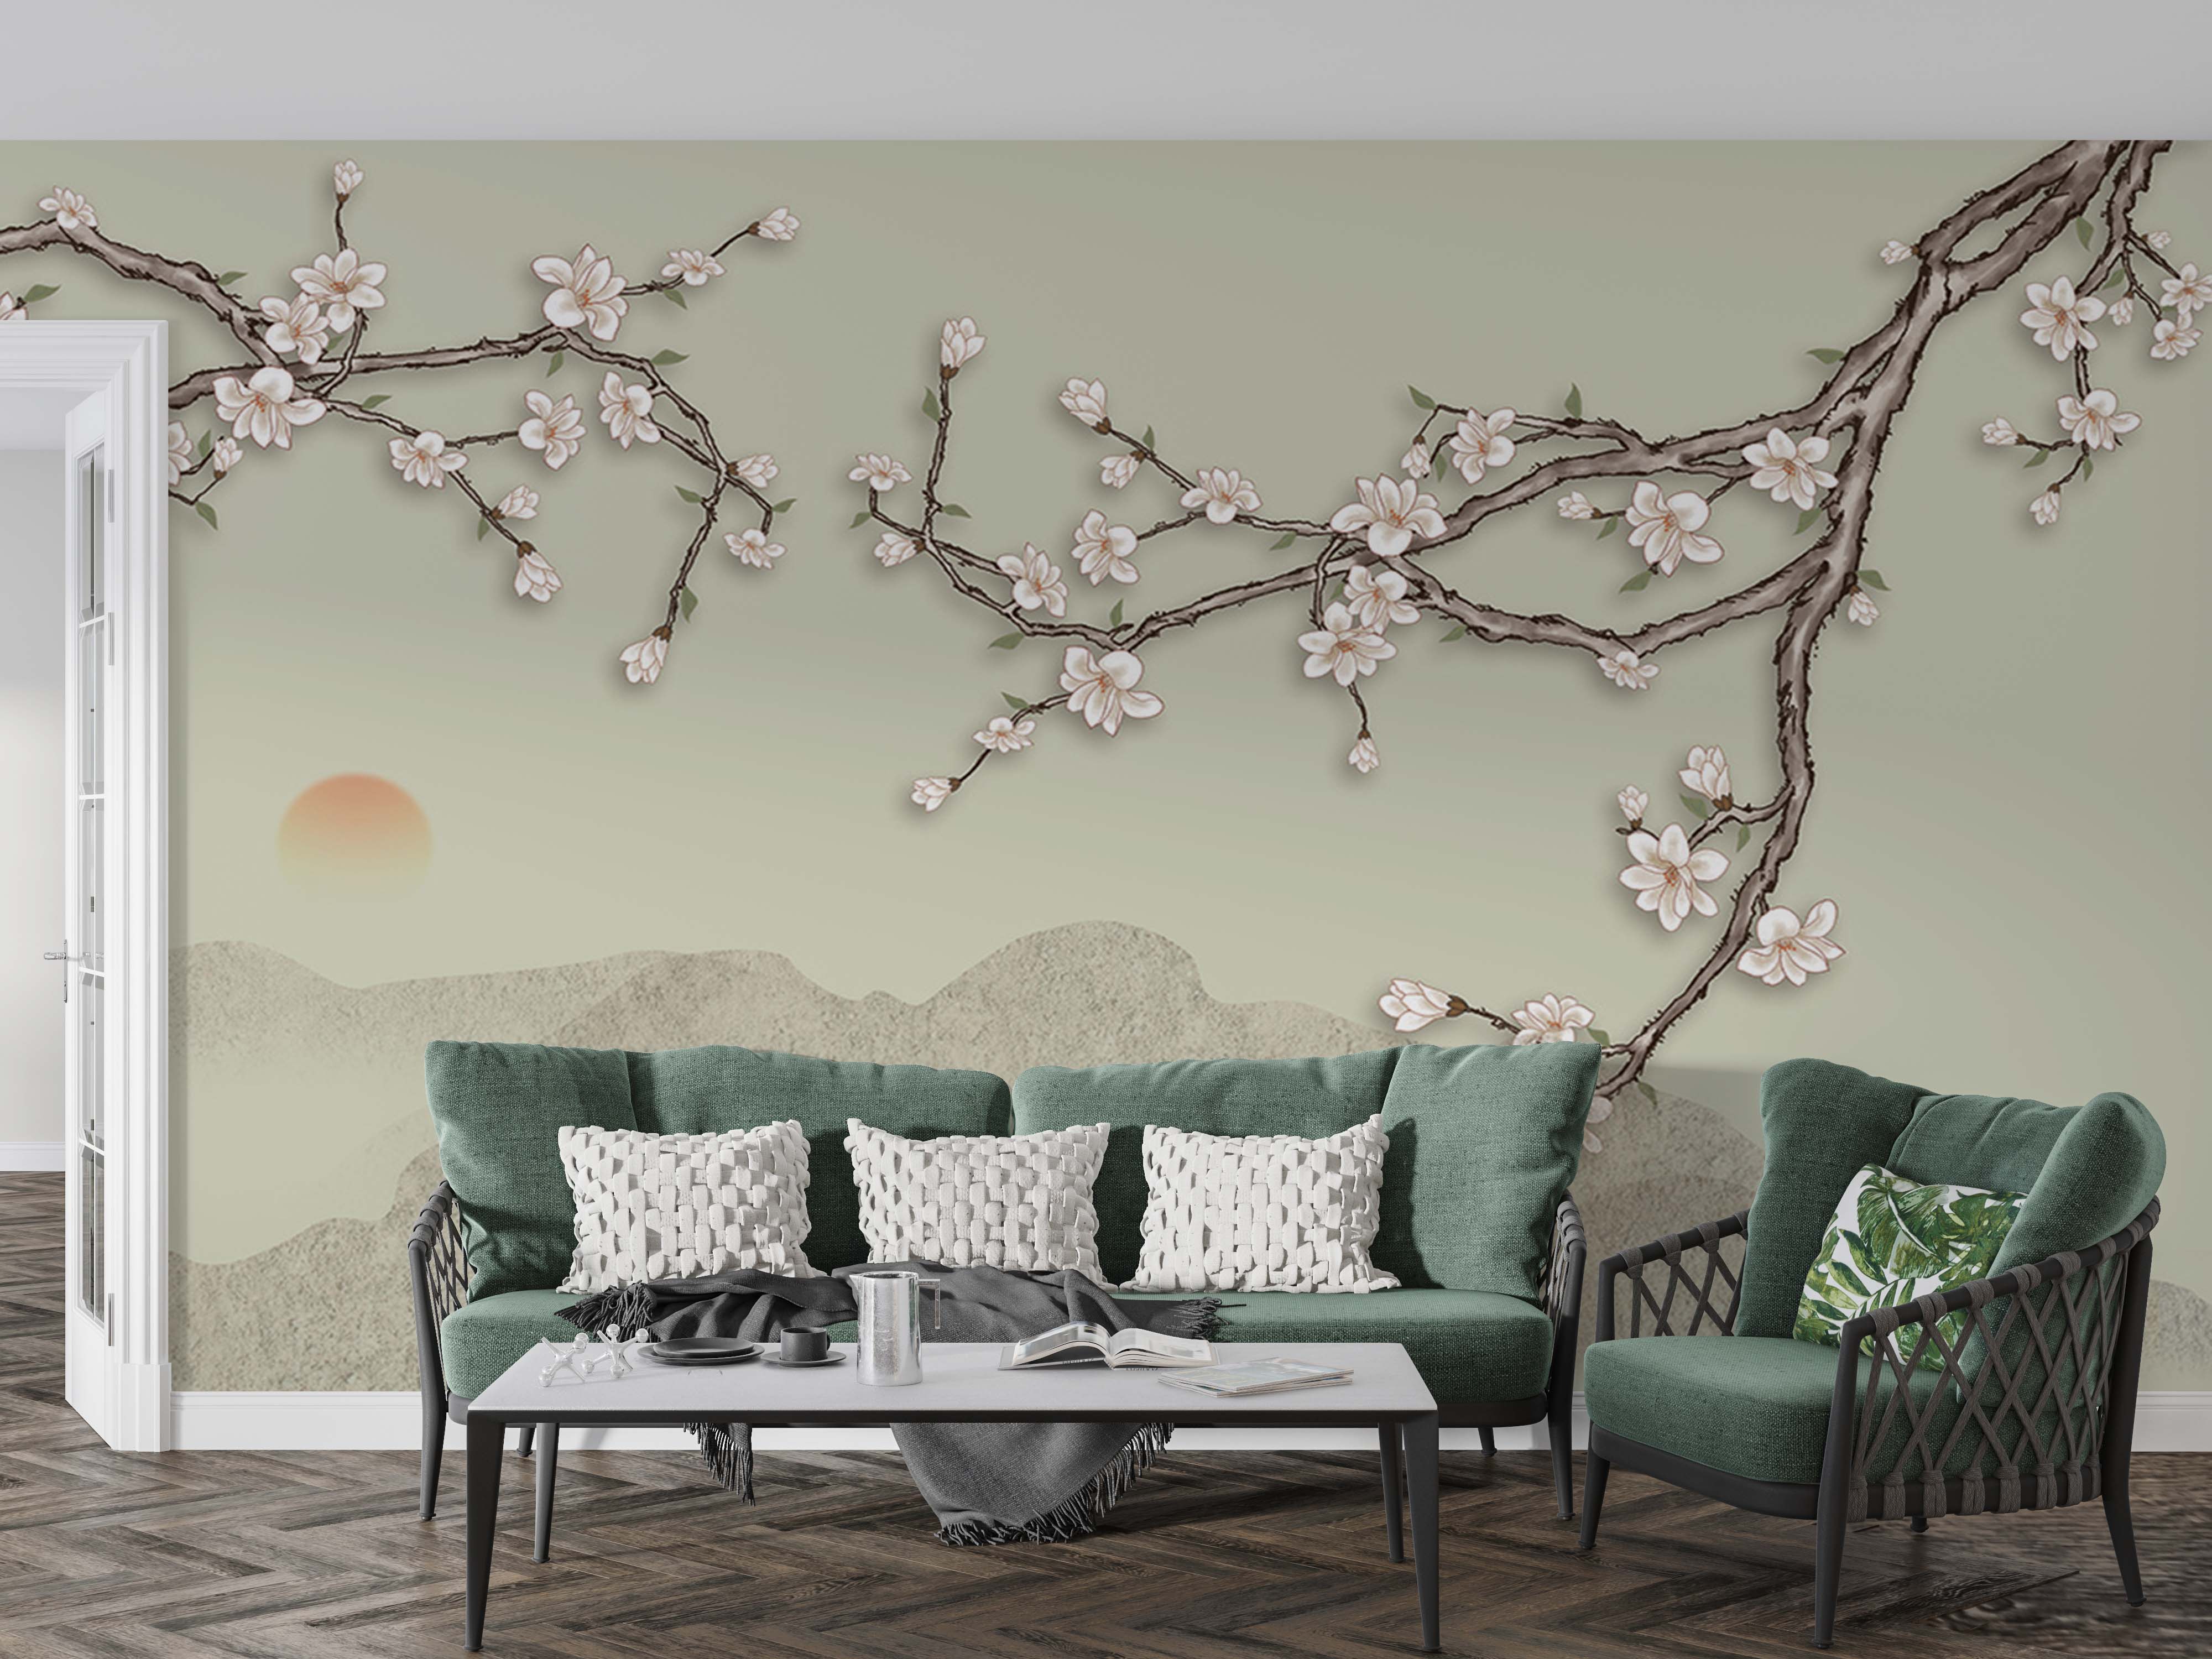 pink-and-green-tropical-leaf-design-square-wall-murals